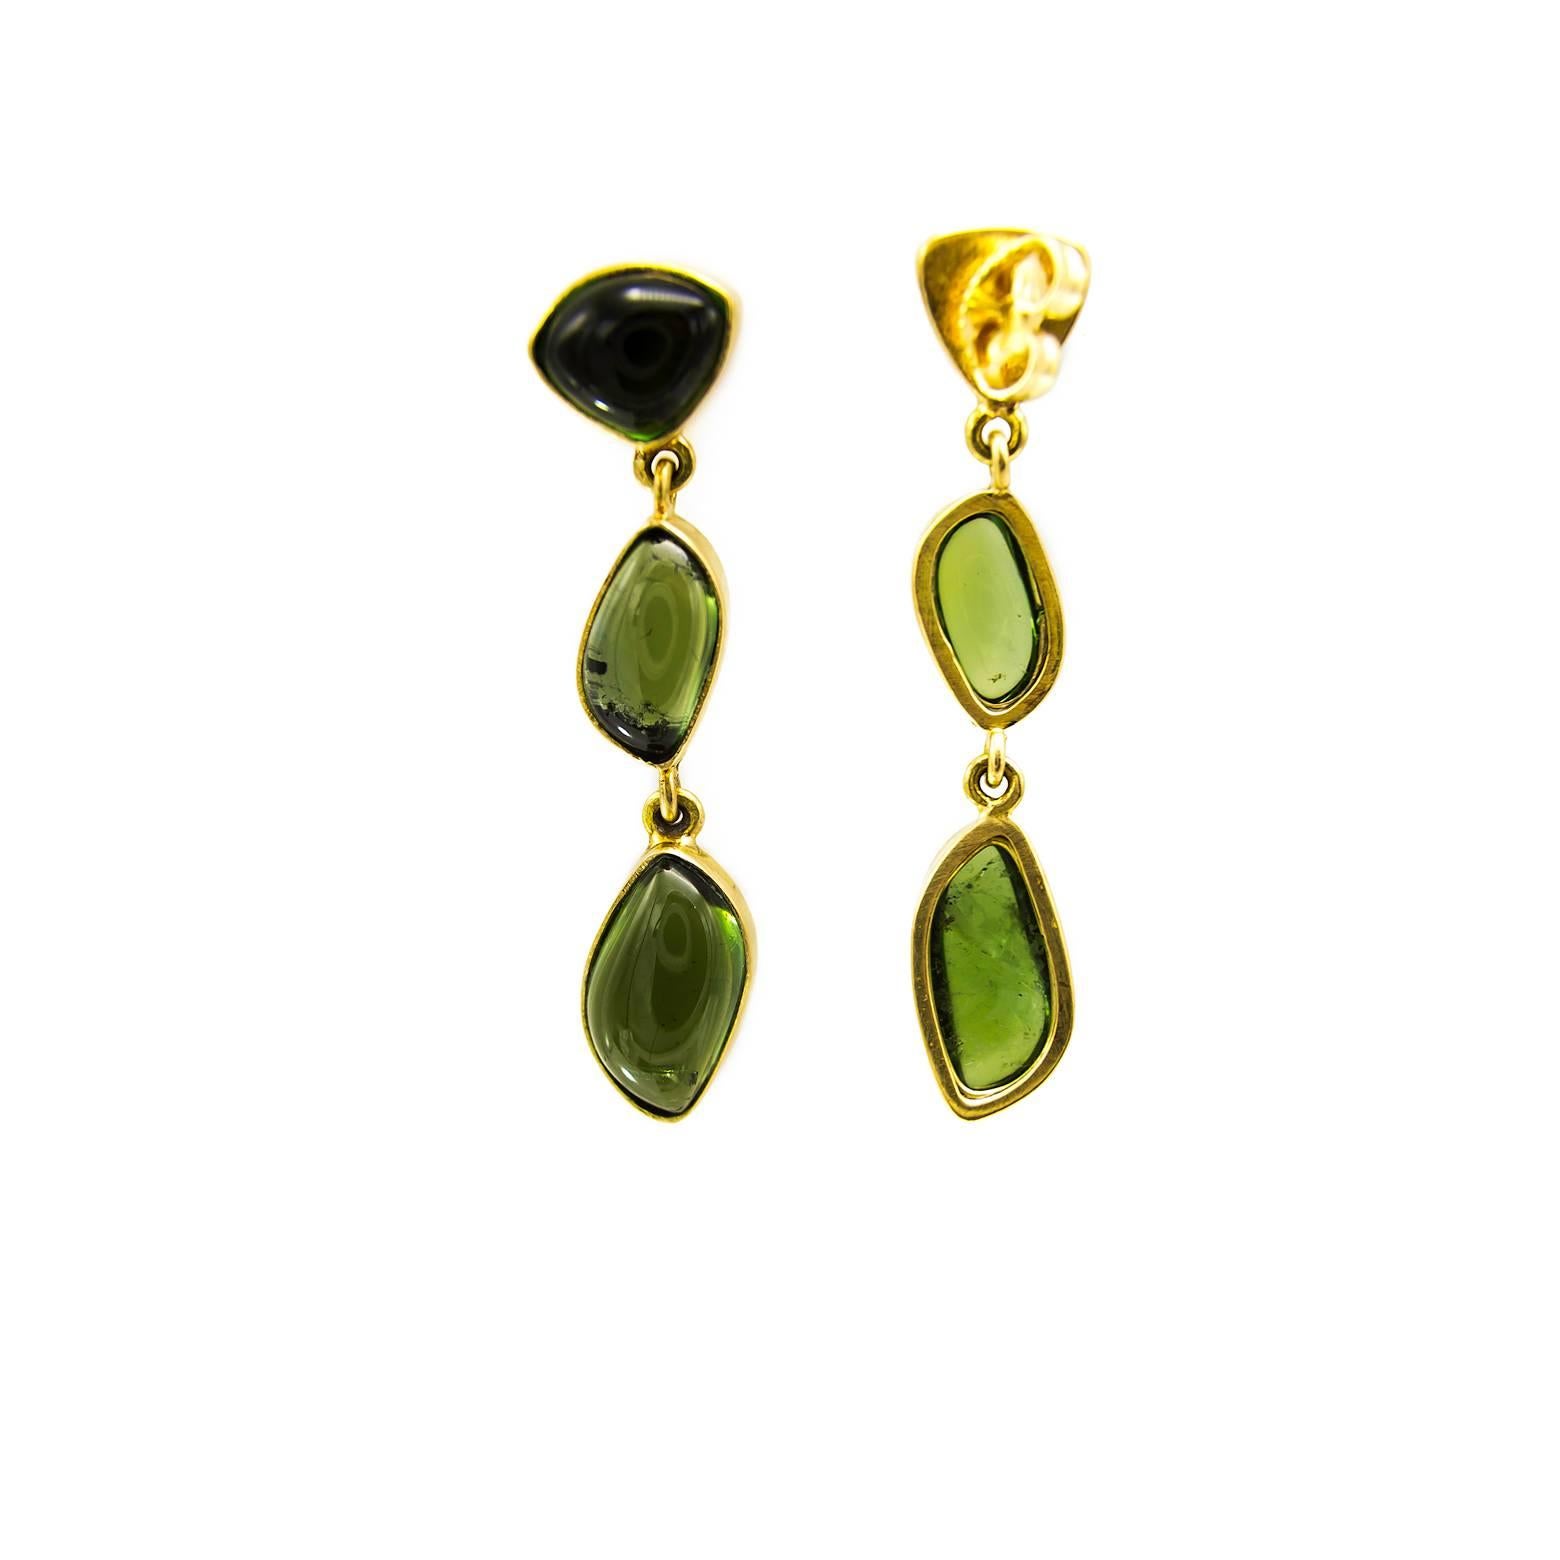 Three different charming cabachons of beautiful spring green tourmalines dangle down in 18K yellow gold. With a substantial weight and a swaying movement these earrings are sure to add a festive flare to any outfit. 